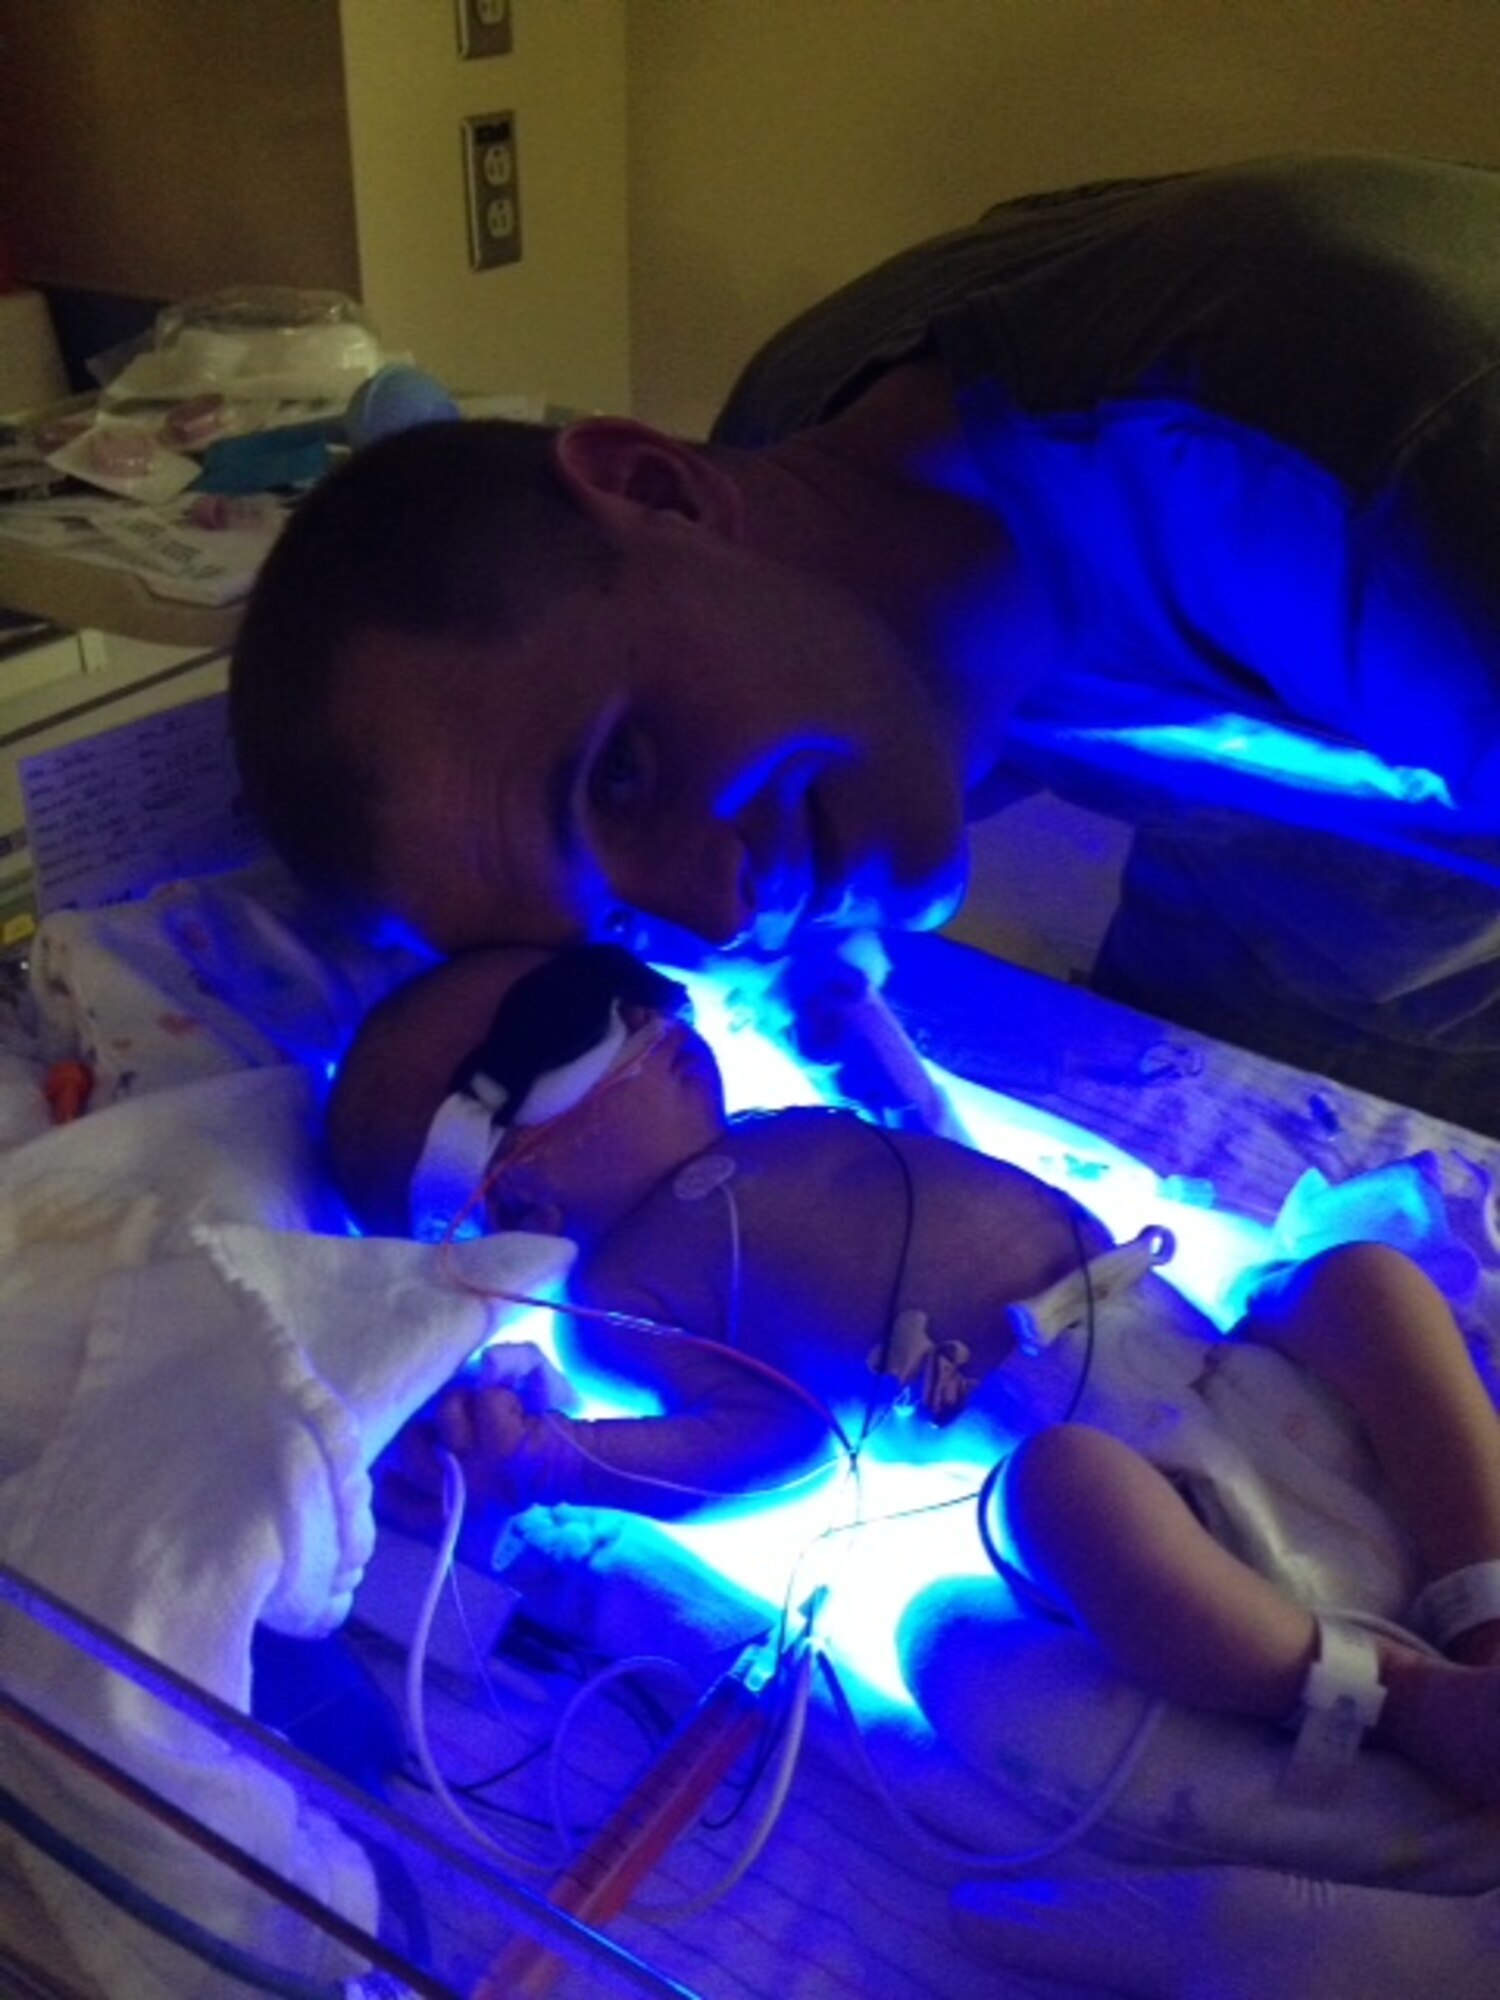 Staff Sgt. Phillip Steffen of the 434th Civil Engineering Squadron at Grissom Air Reserve Base, Indiana, poses for a photo with his daughter in the neonatal intensive care unit at Lutheran Hospital in Ft. Wayne, Indiana after meeting her for the first time July 22, 2014. Steffen, the assistant noncommissioned officer in charge of the structures shop at the 434th CES, arrived home from deployment 25 hours after his daughter was born. (Courtesy photo)